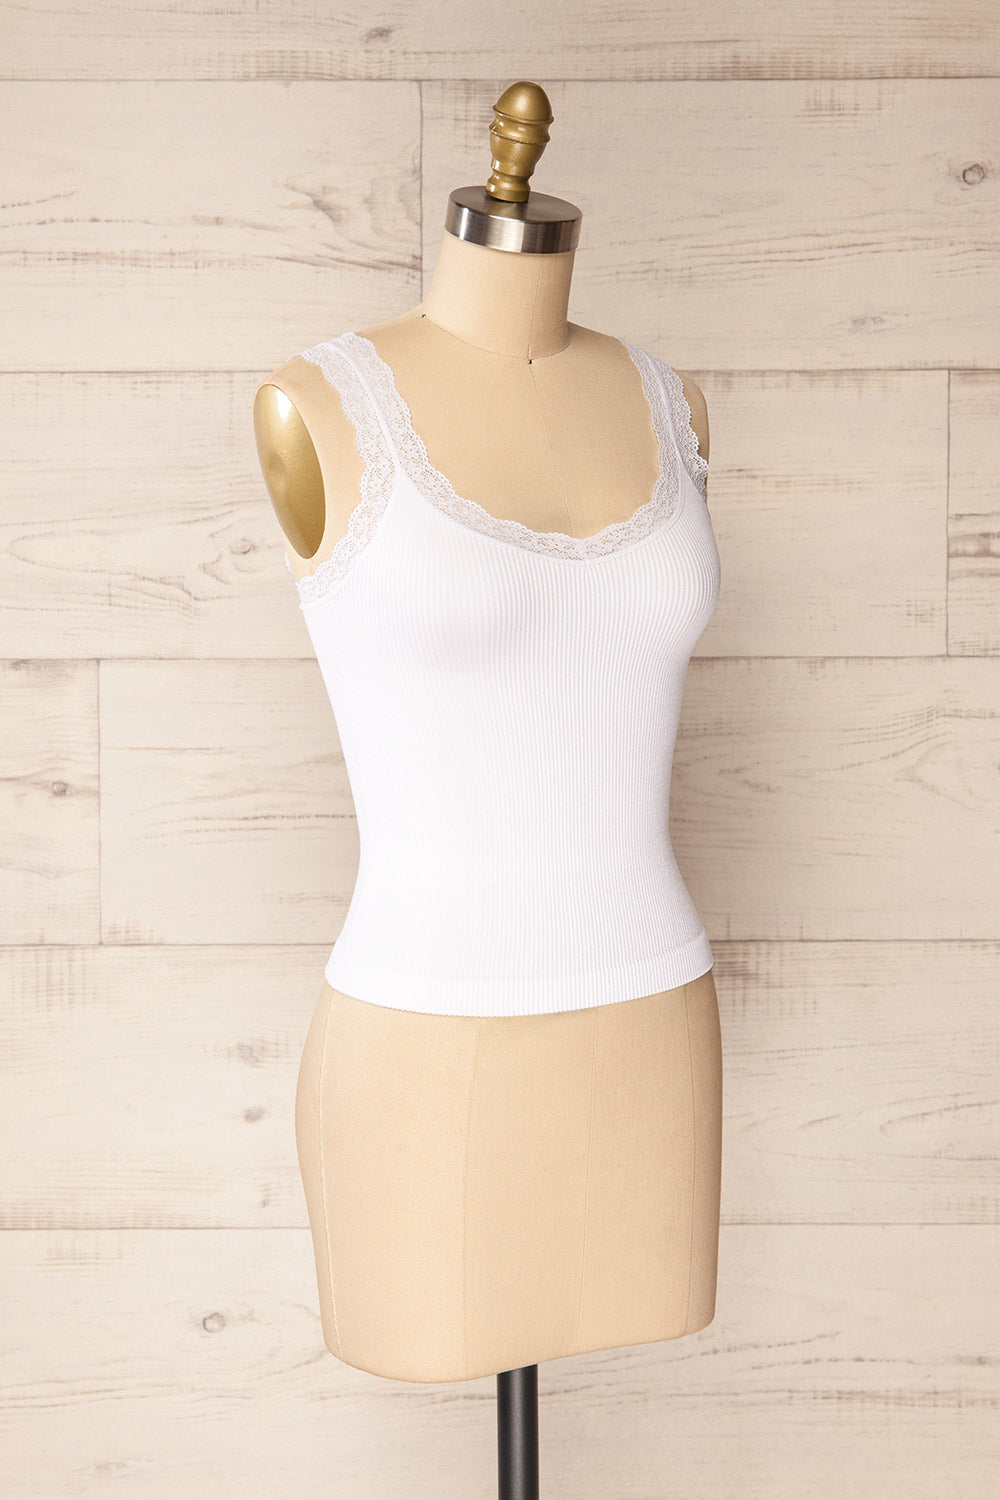 Somensac White Ribbed Camisole w/ Lace Trim | Boutique 1861 side view